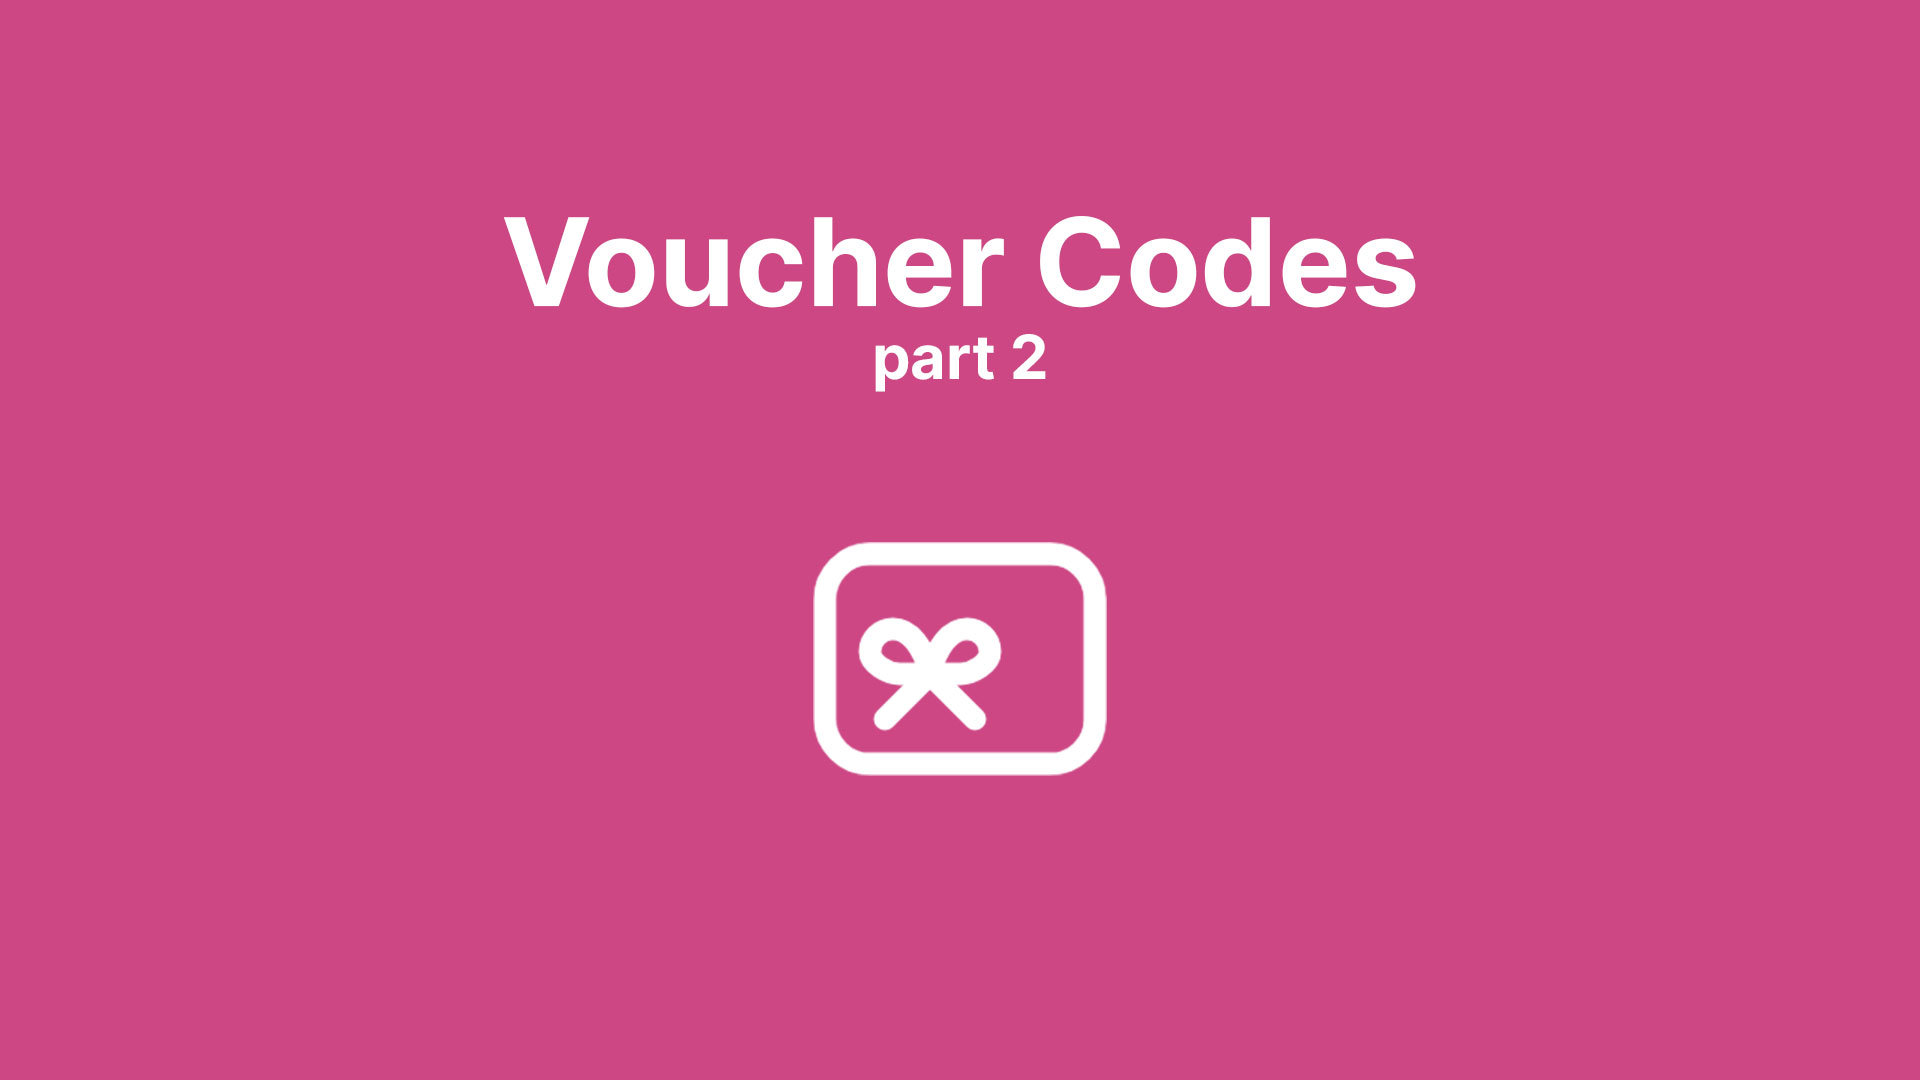 Using Voucher Codes in Customer Insights – The Fun Part